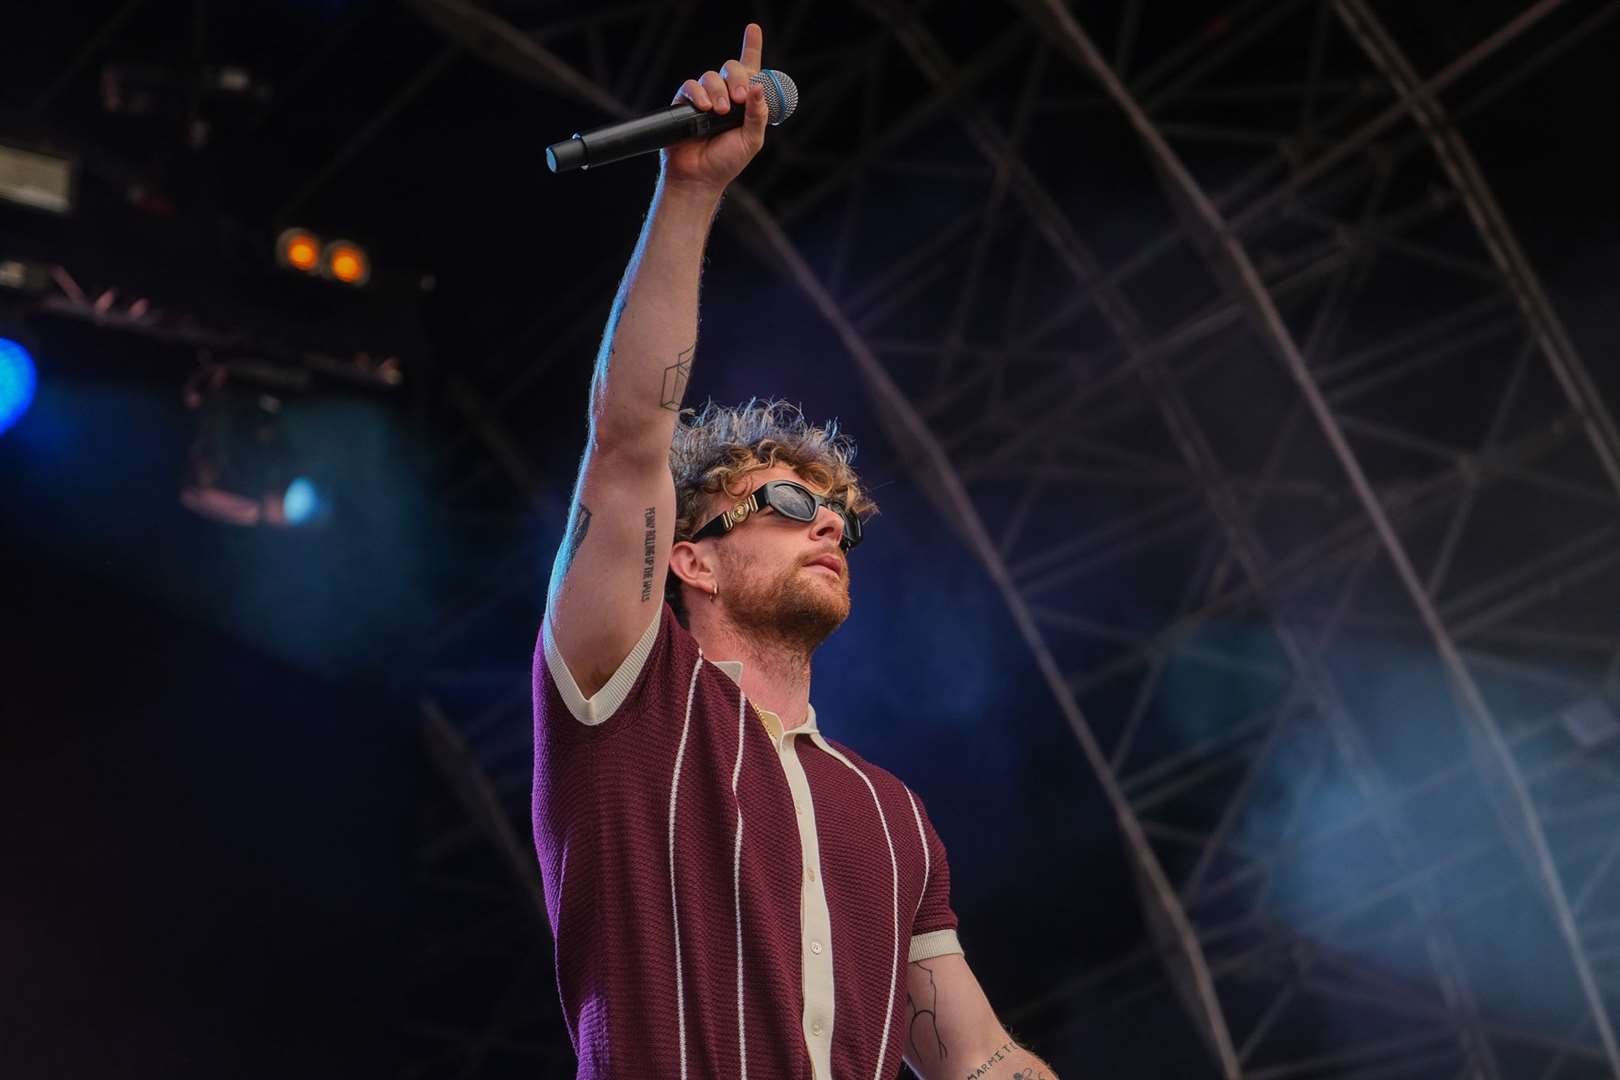 Tom Grennan topped the charts with his 2021 album Evering Road